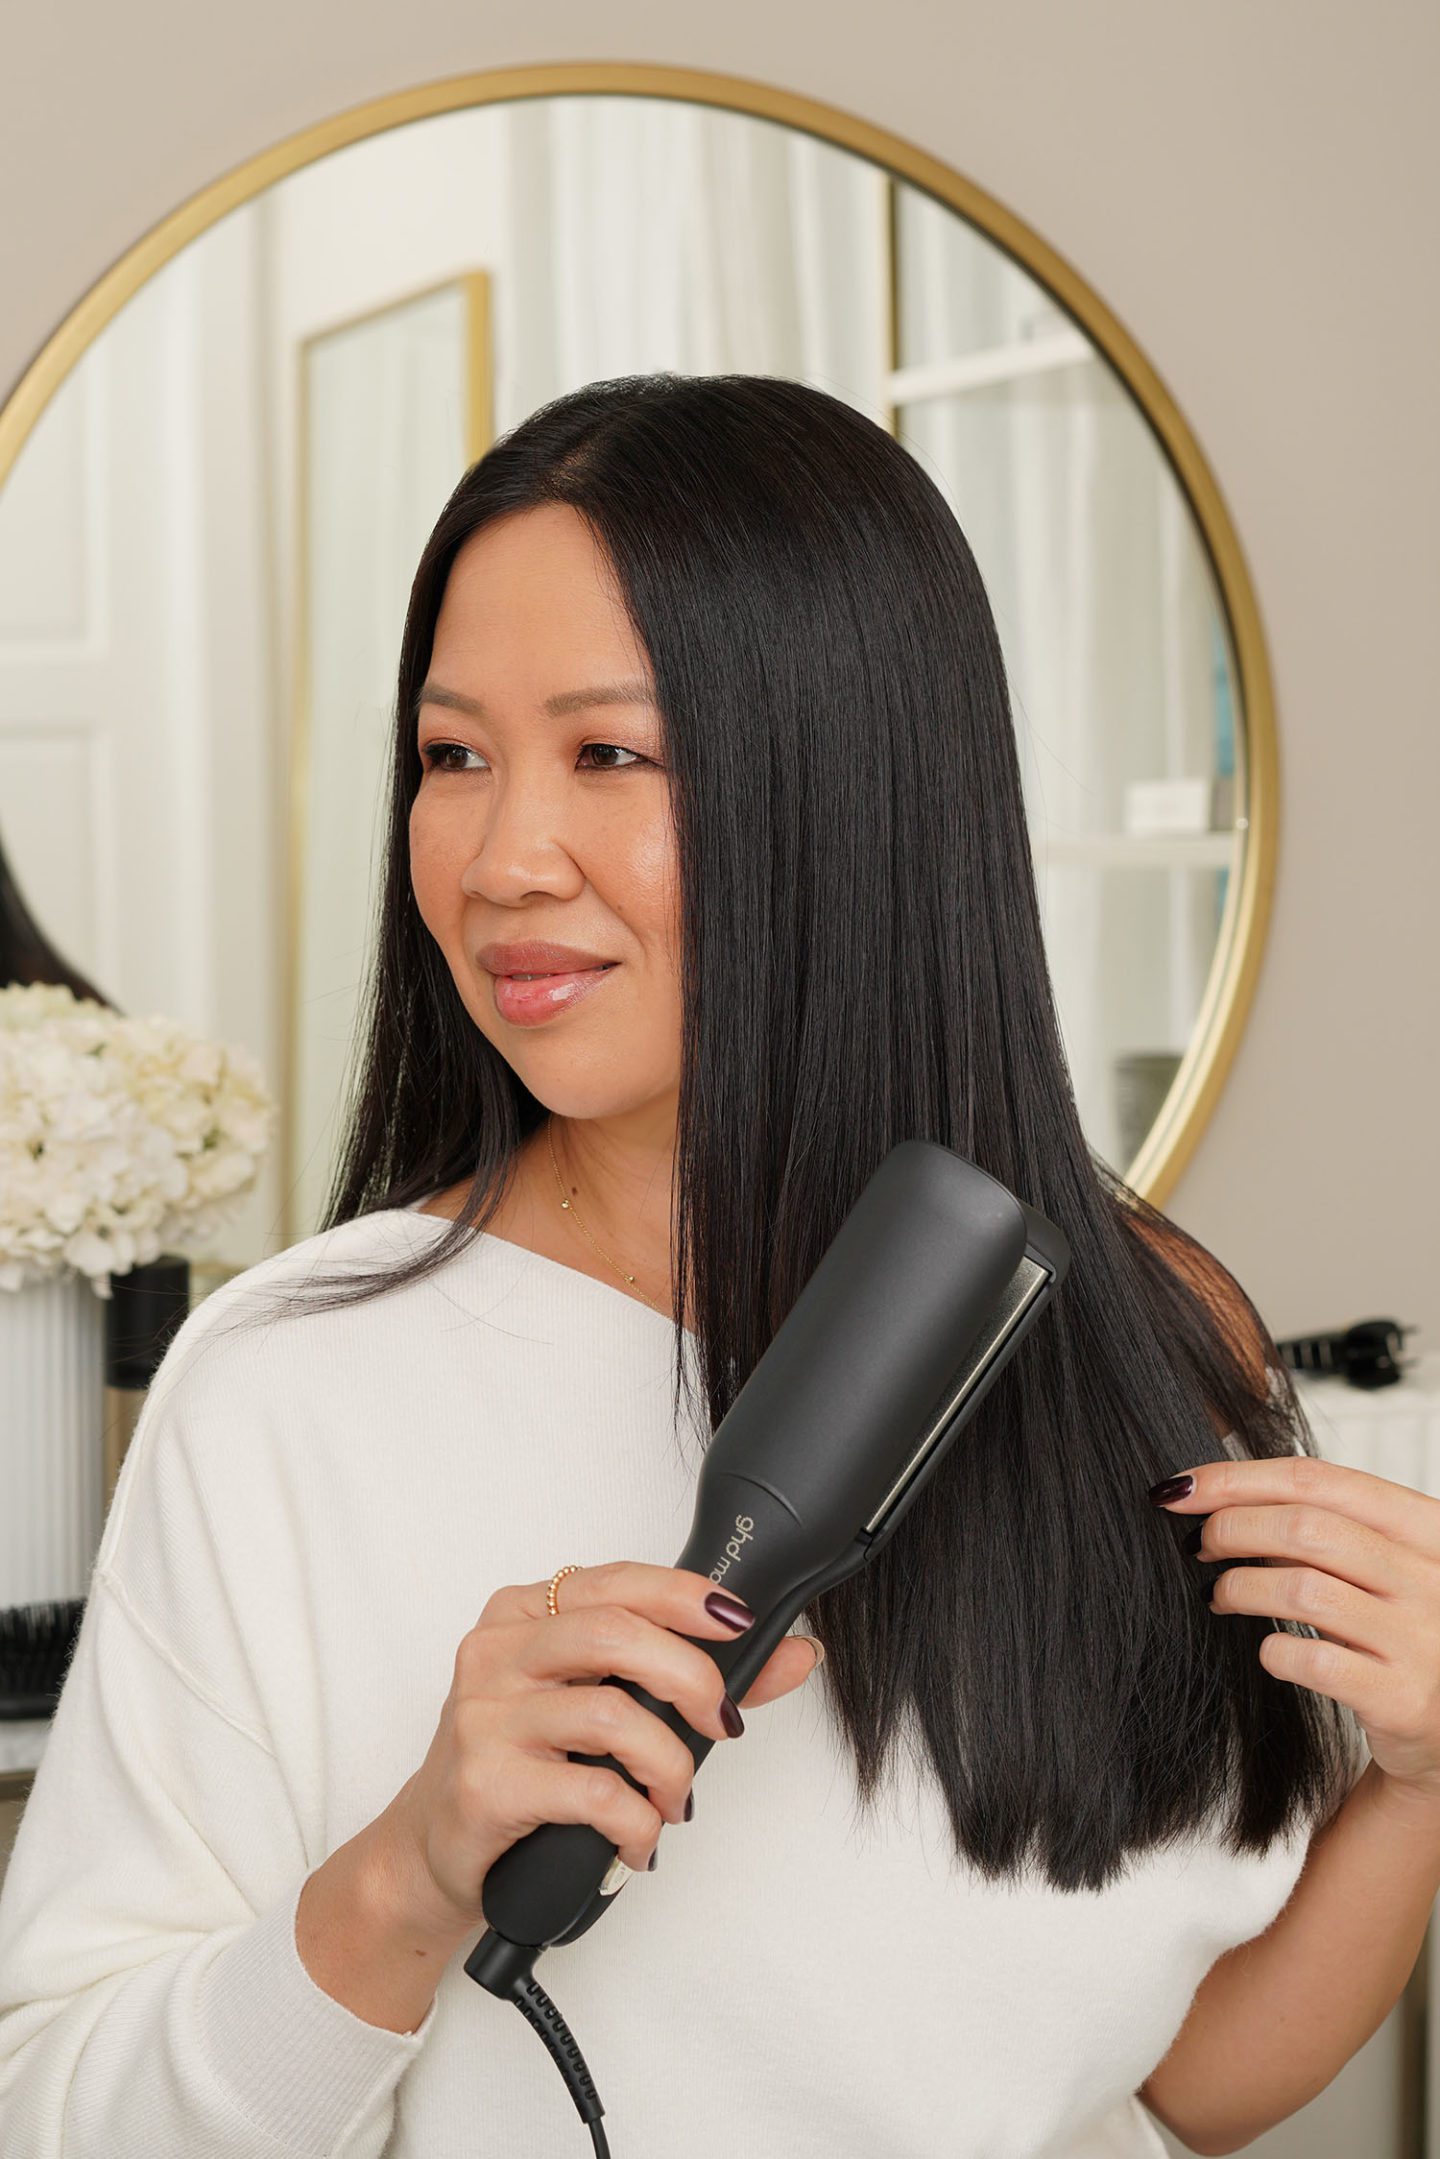 ghd Max Styler review - wide plate flat iron